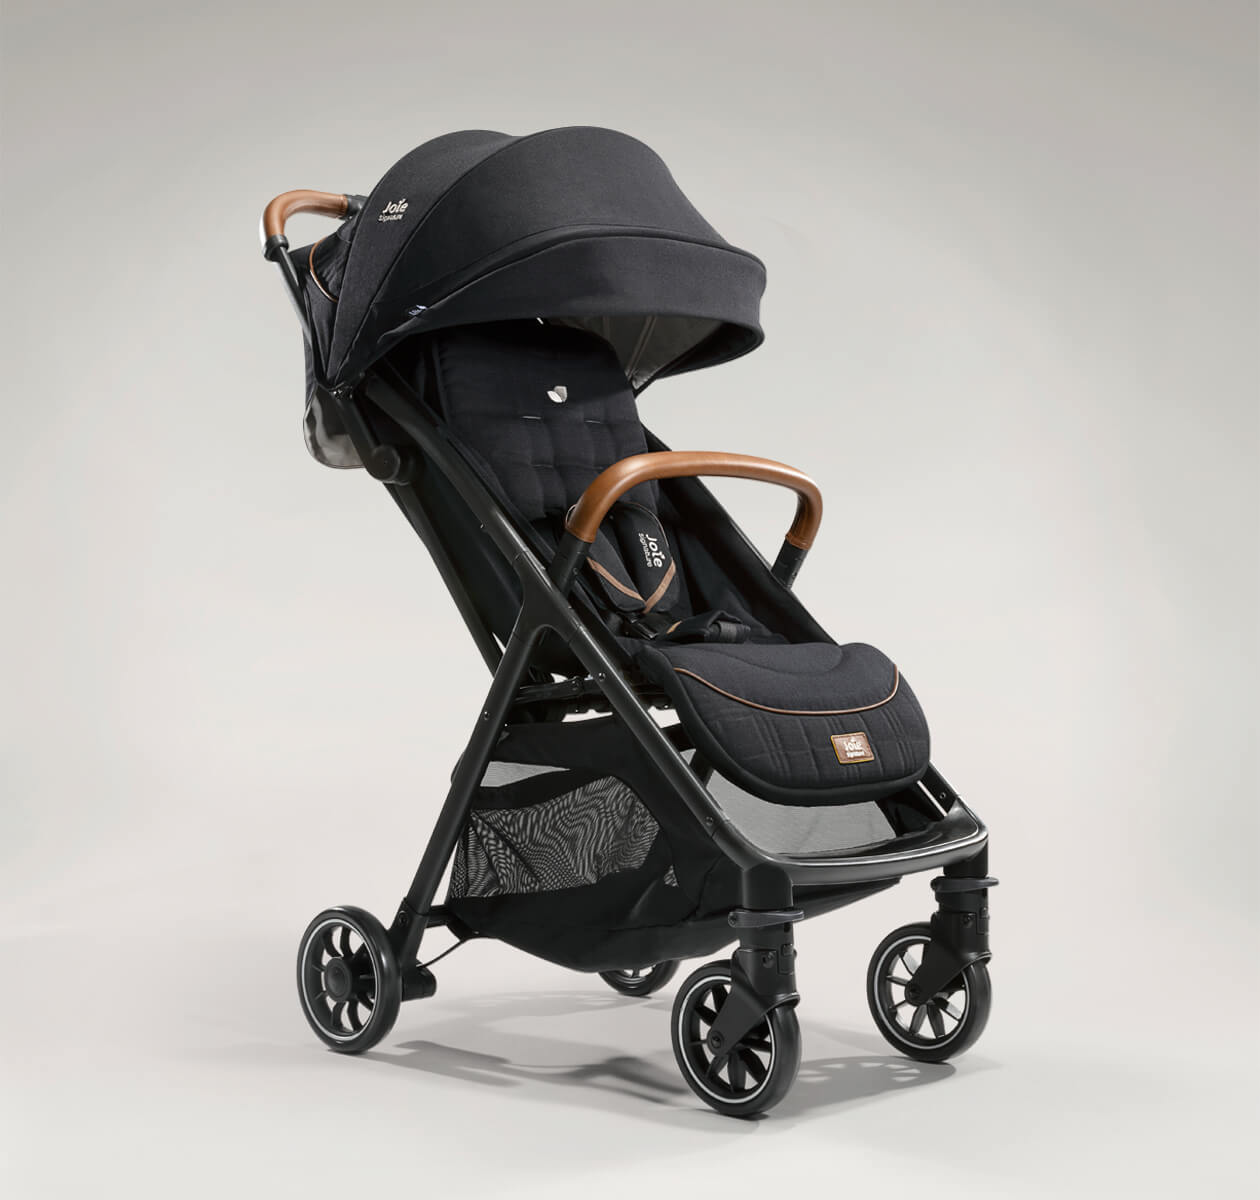    Joie signature lightweight stroller parcel in black at an angle. 